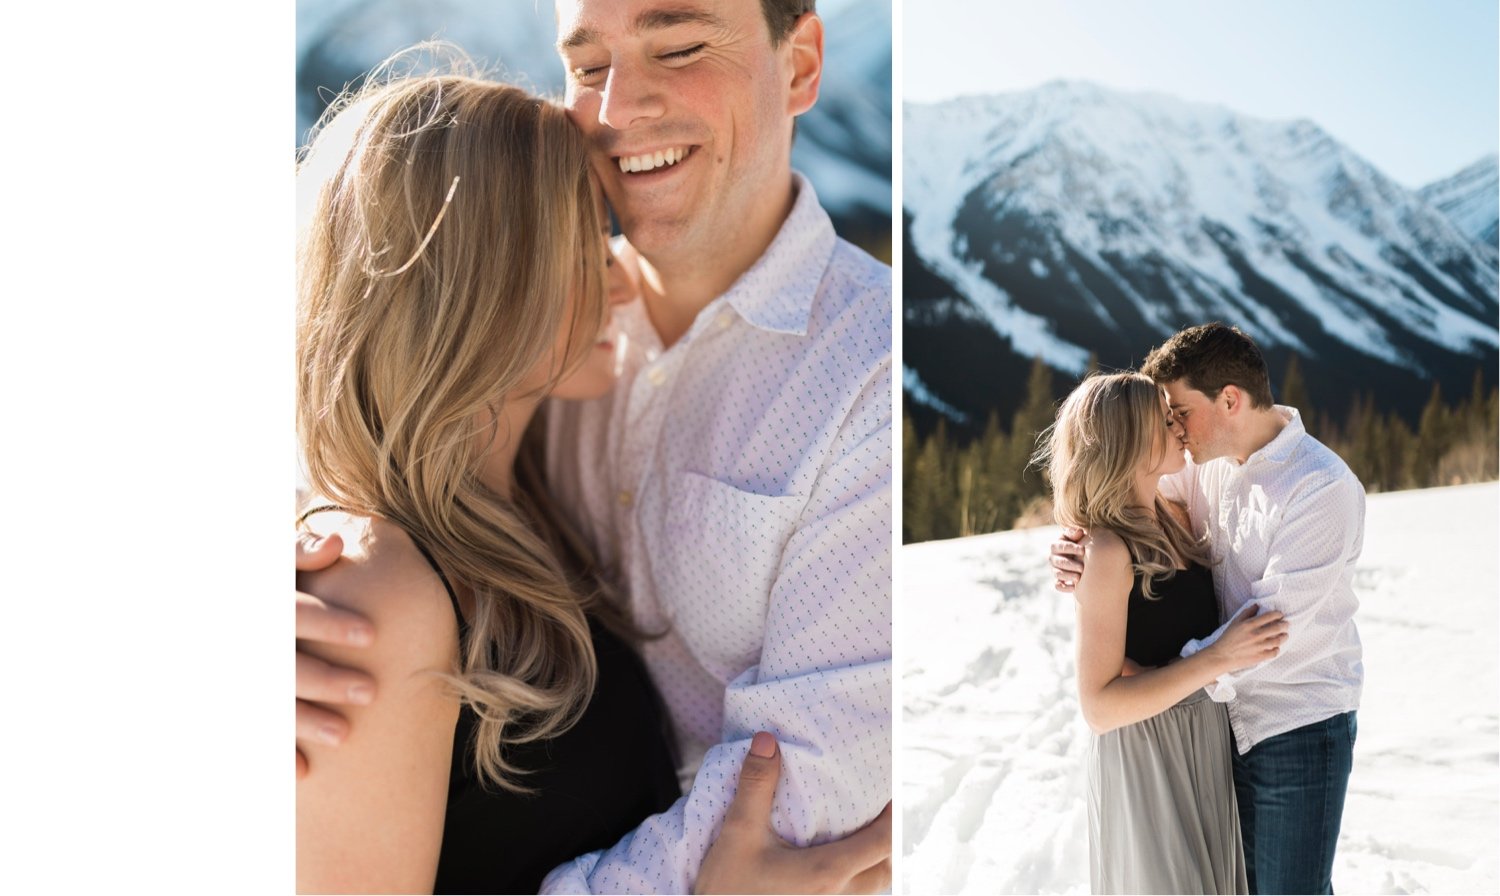 17_sunlight_landscape_Kananaskis_Canmore_Banff_trees_couple_engagement_close_simple_dog_cuddle_kiss_golden_hour_intimate_nature_mountains_fiancee_spring_winter_delicate_ice_bride_snow_soft_Calgary_Alberta_photographer_forest_groom_outdoor.jpg